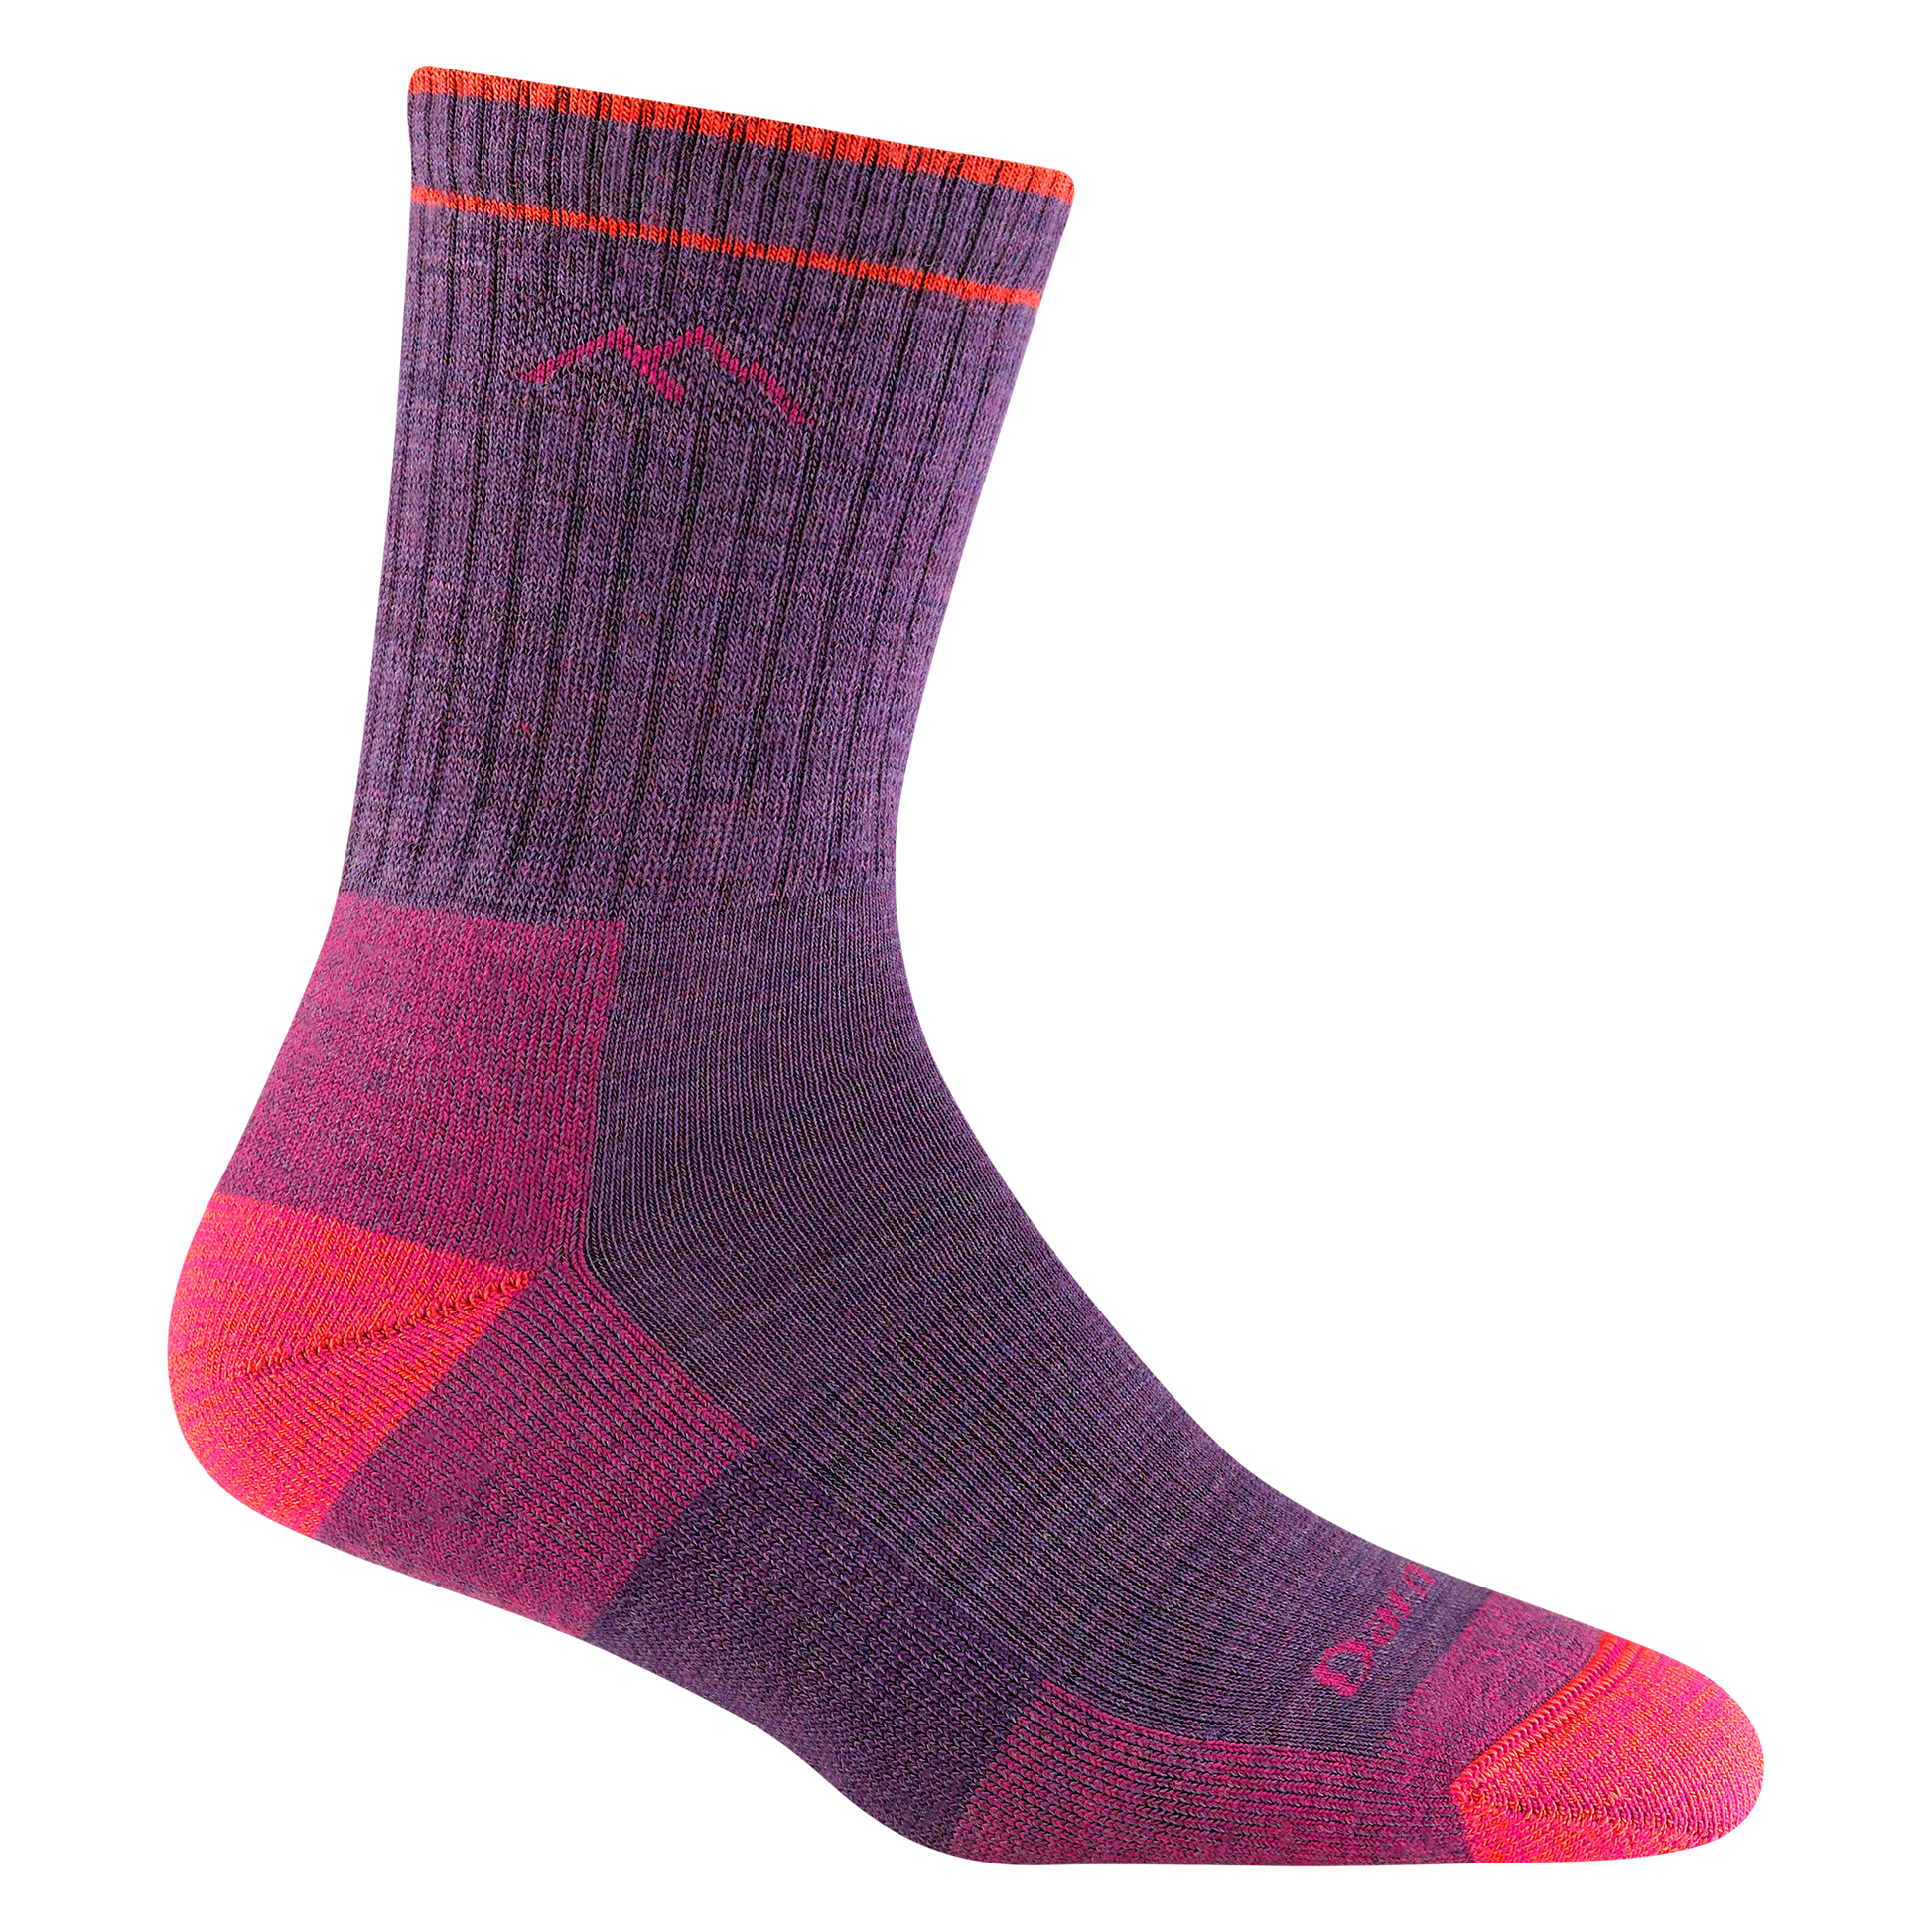 Darn tough plum sock with pink mountain outline detail, pink toe and heel